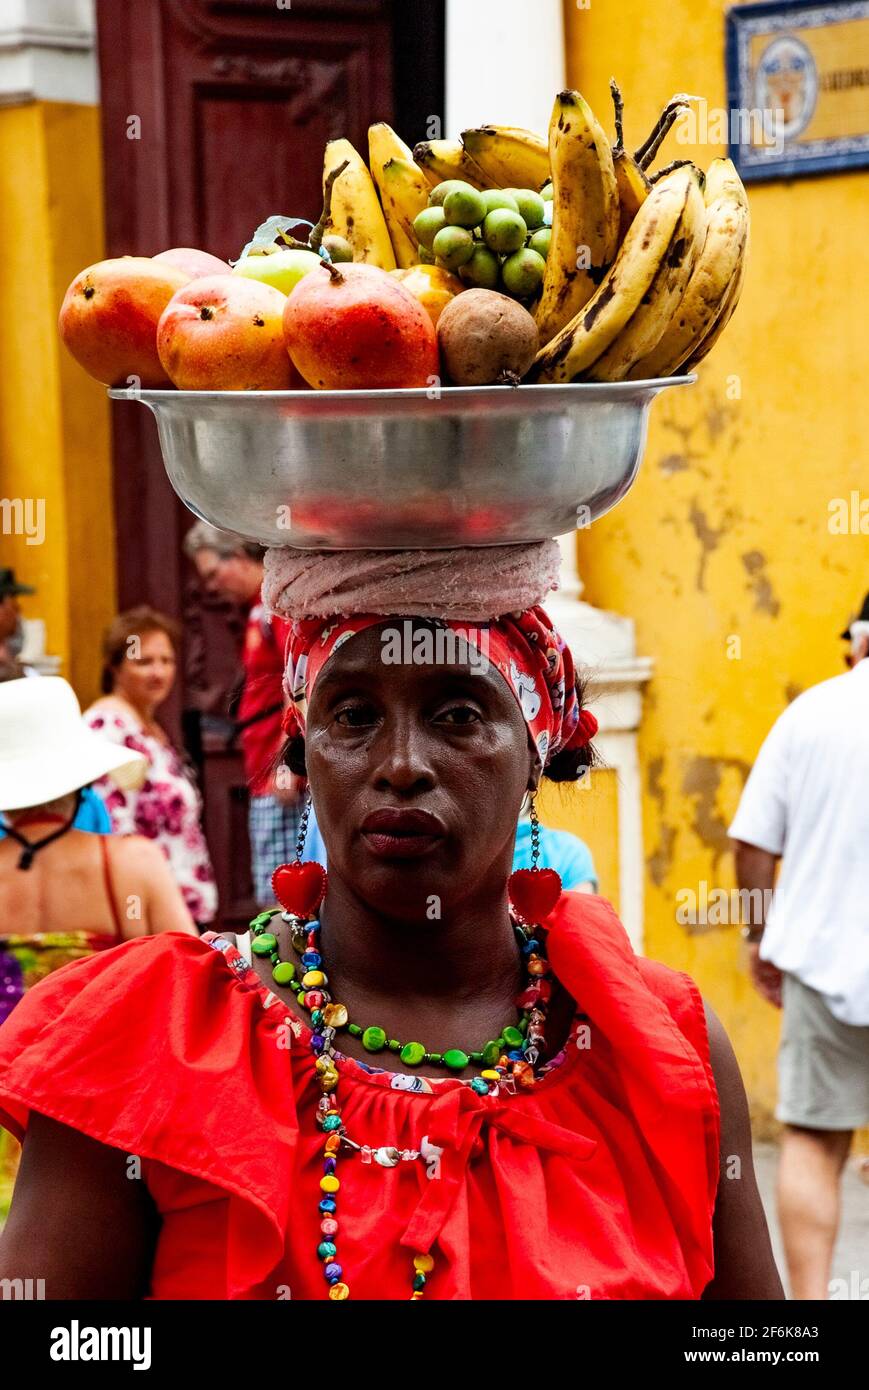 Cartagena, Colombia, Old Walled City Center centre, Centro, Playa de las Bovedas, shopping arcade. Woman in traditional costume selling fruit in the h Stock Photo